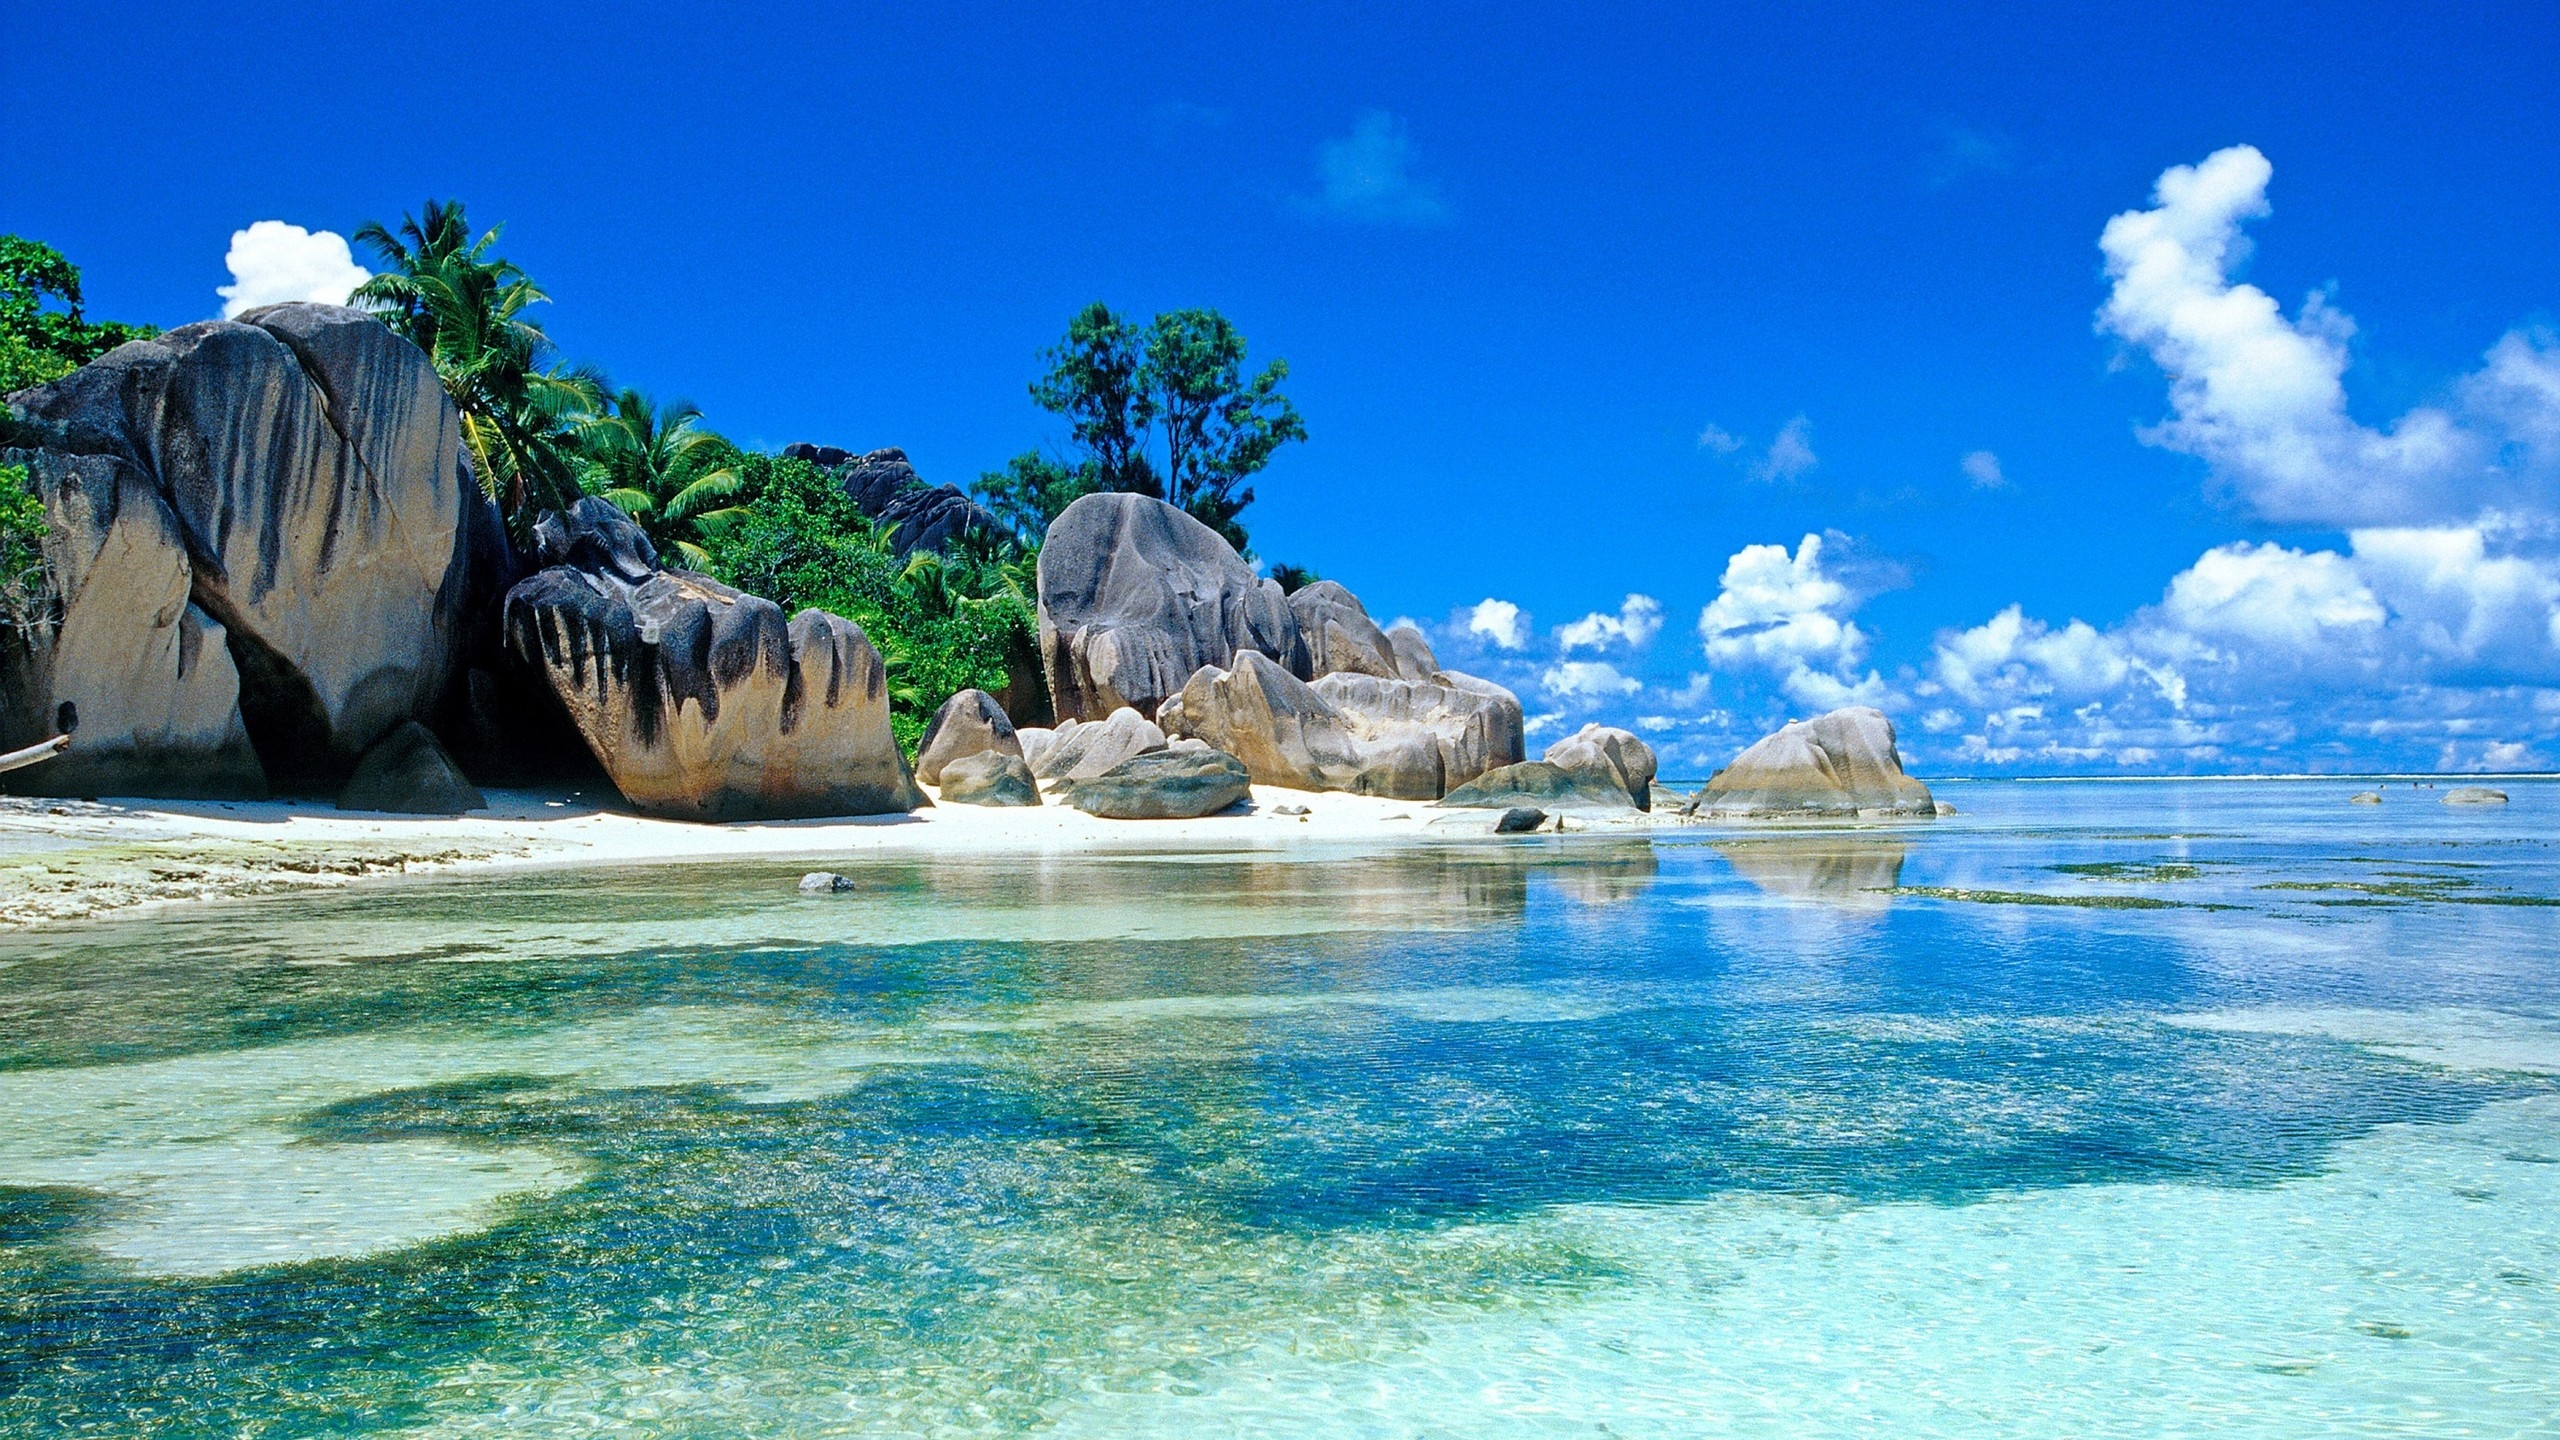 Tropical Sea for 2560x1440 HDTV resolution